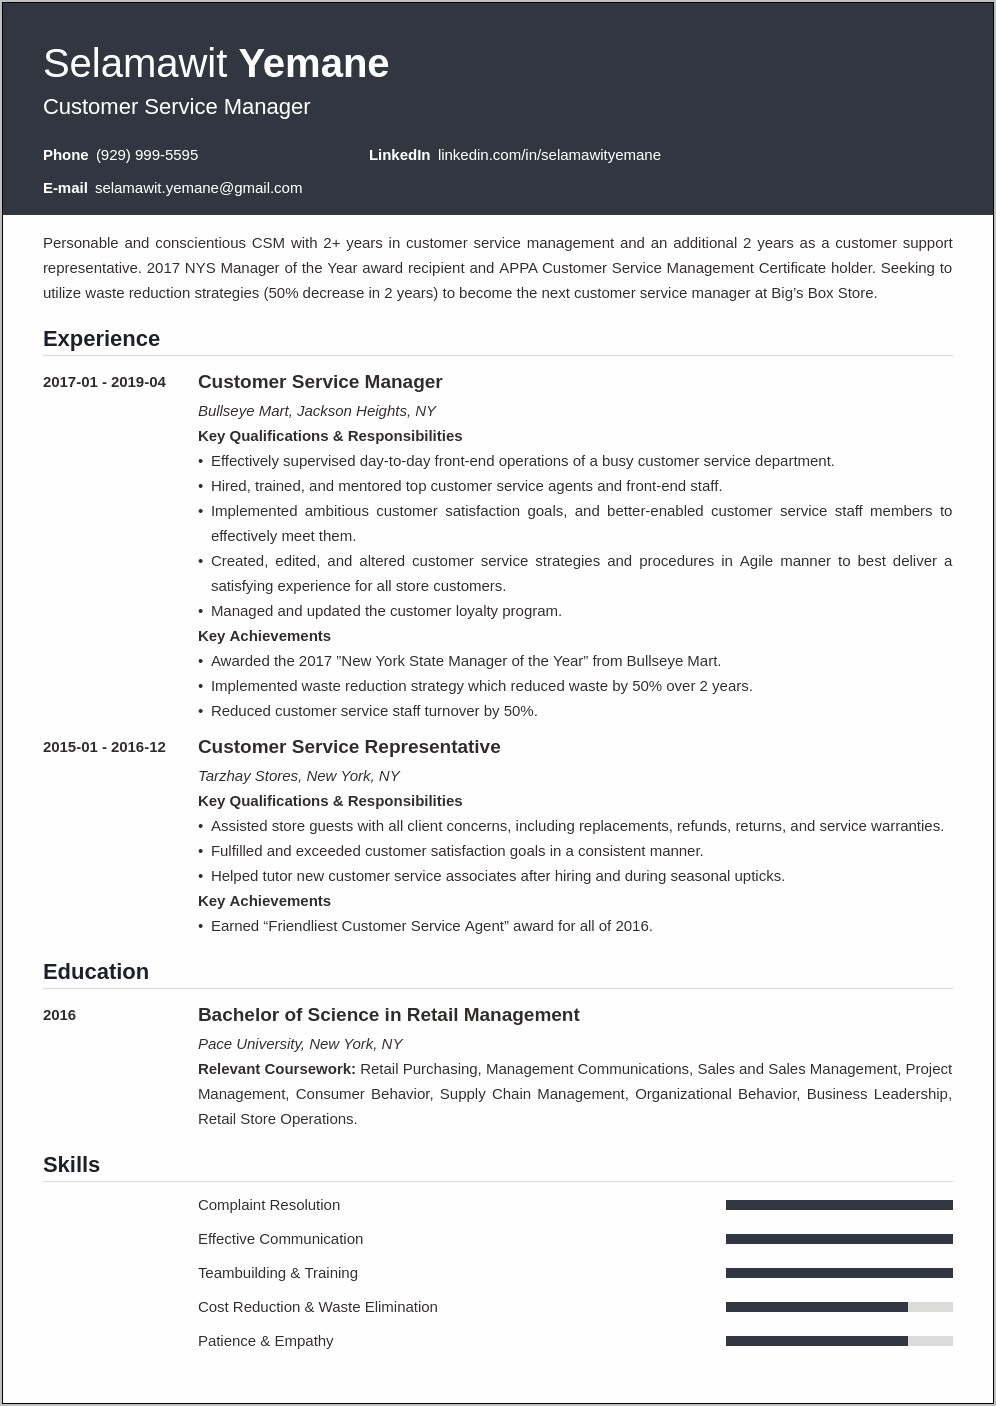 Resume For It Services Manager Position